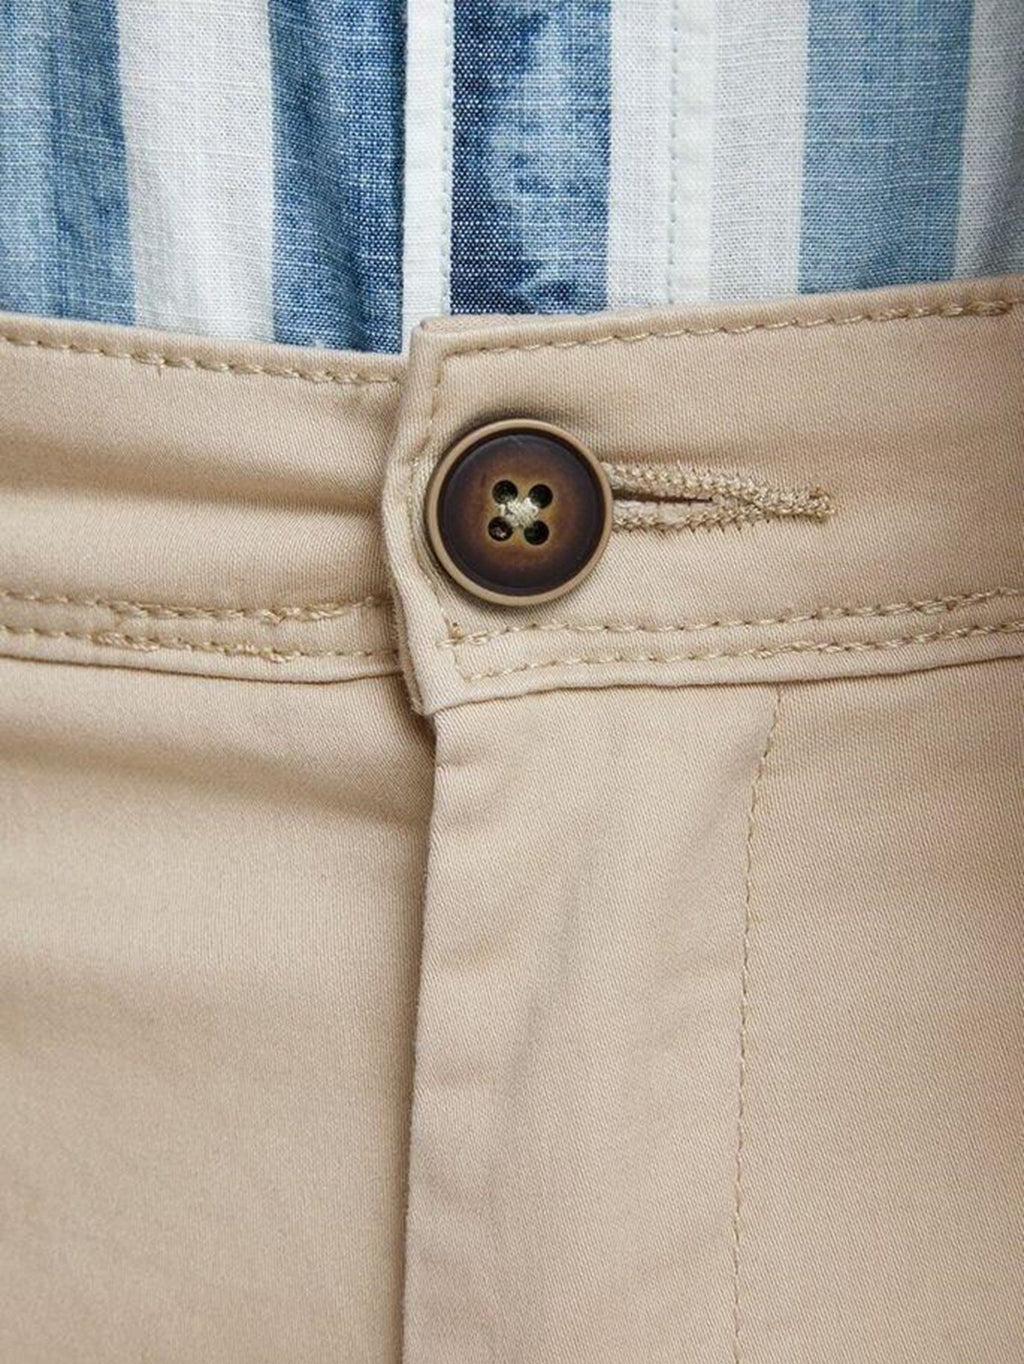 Marco Bowie Chino Pants - Lys sand